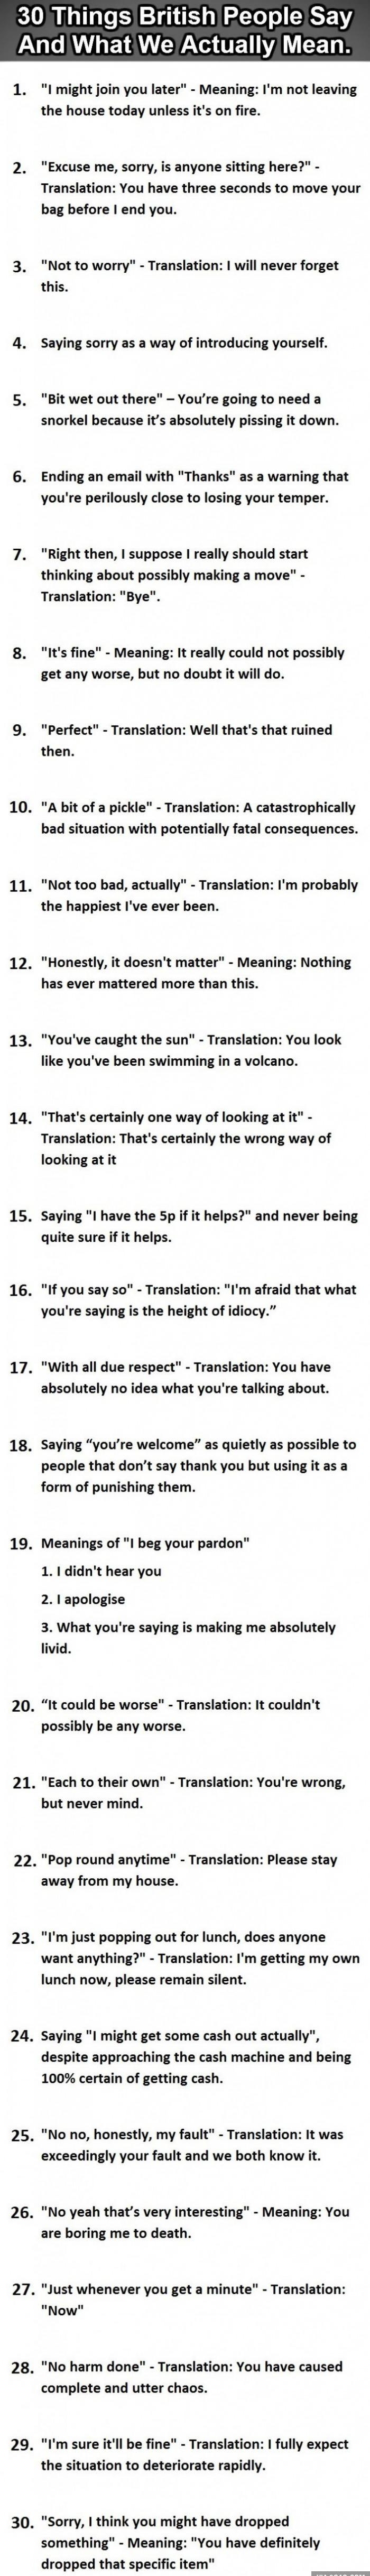 Things British people say and what they actually mean.